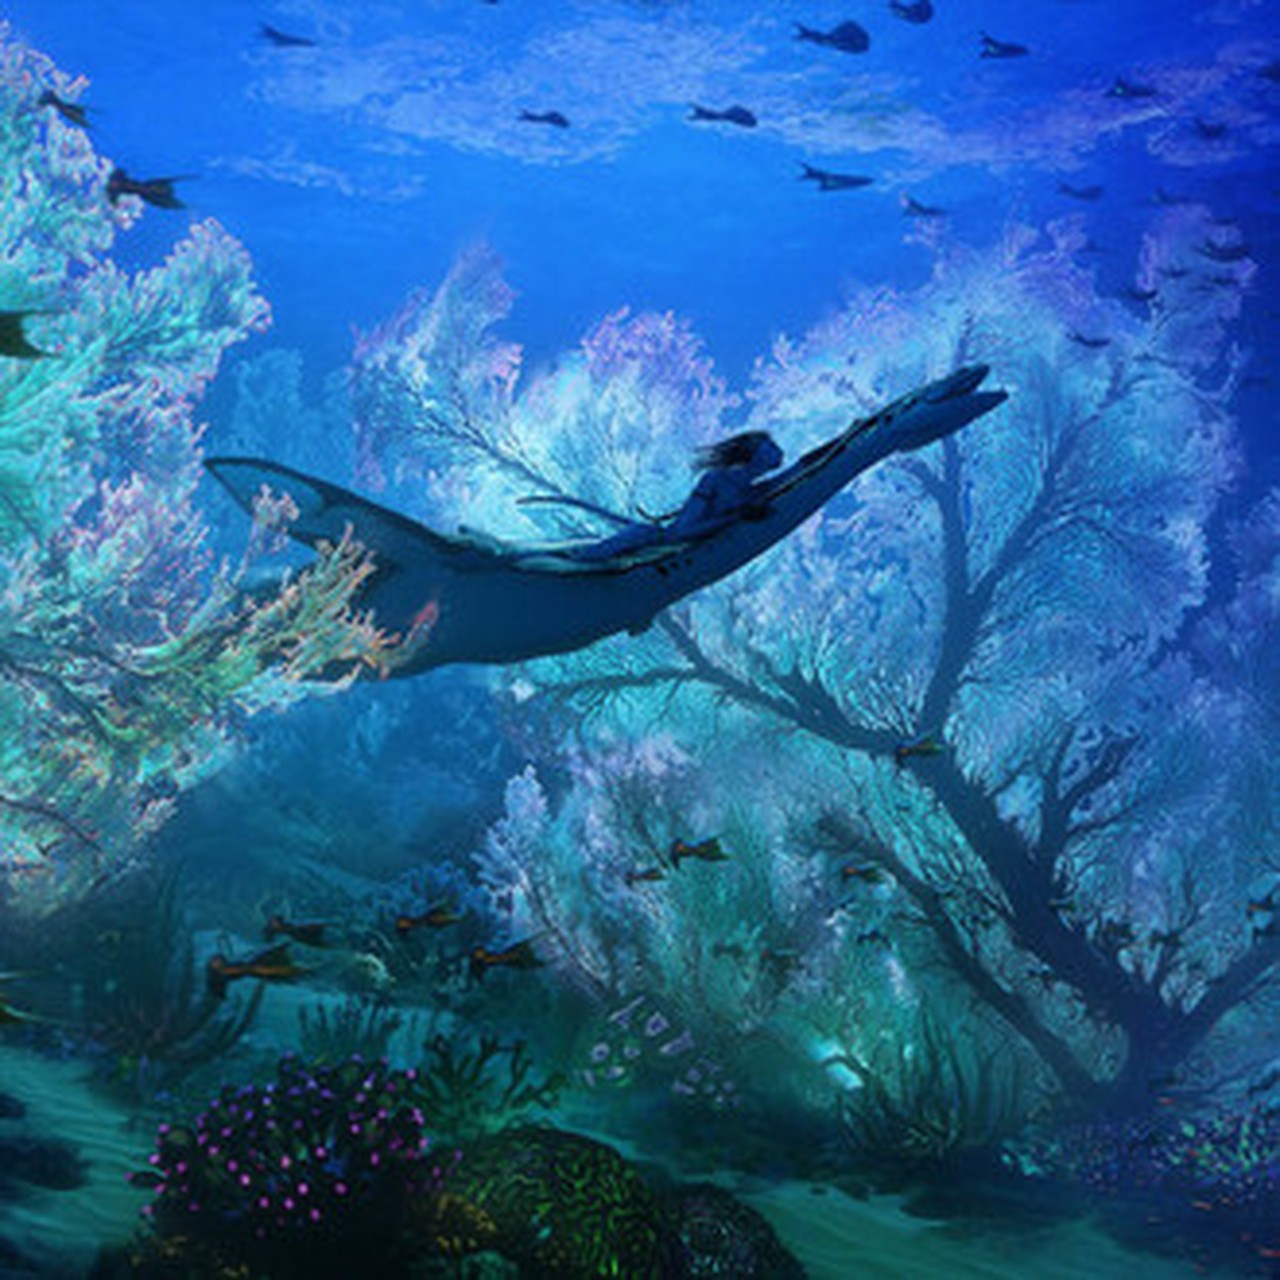 AI Art Generator: An underwater scene with mermaid anime characters and  colorful coral reefs.